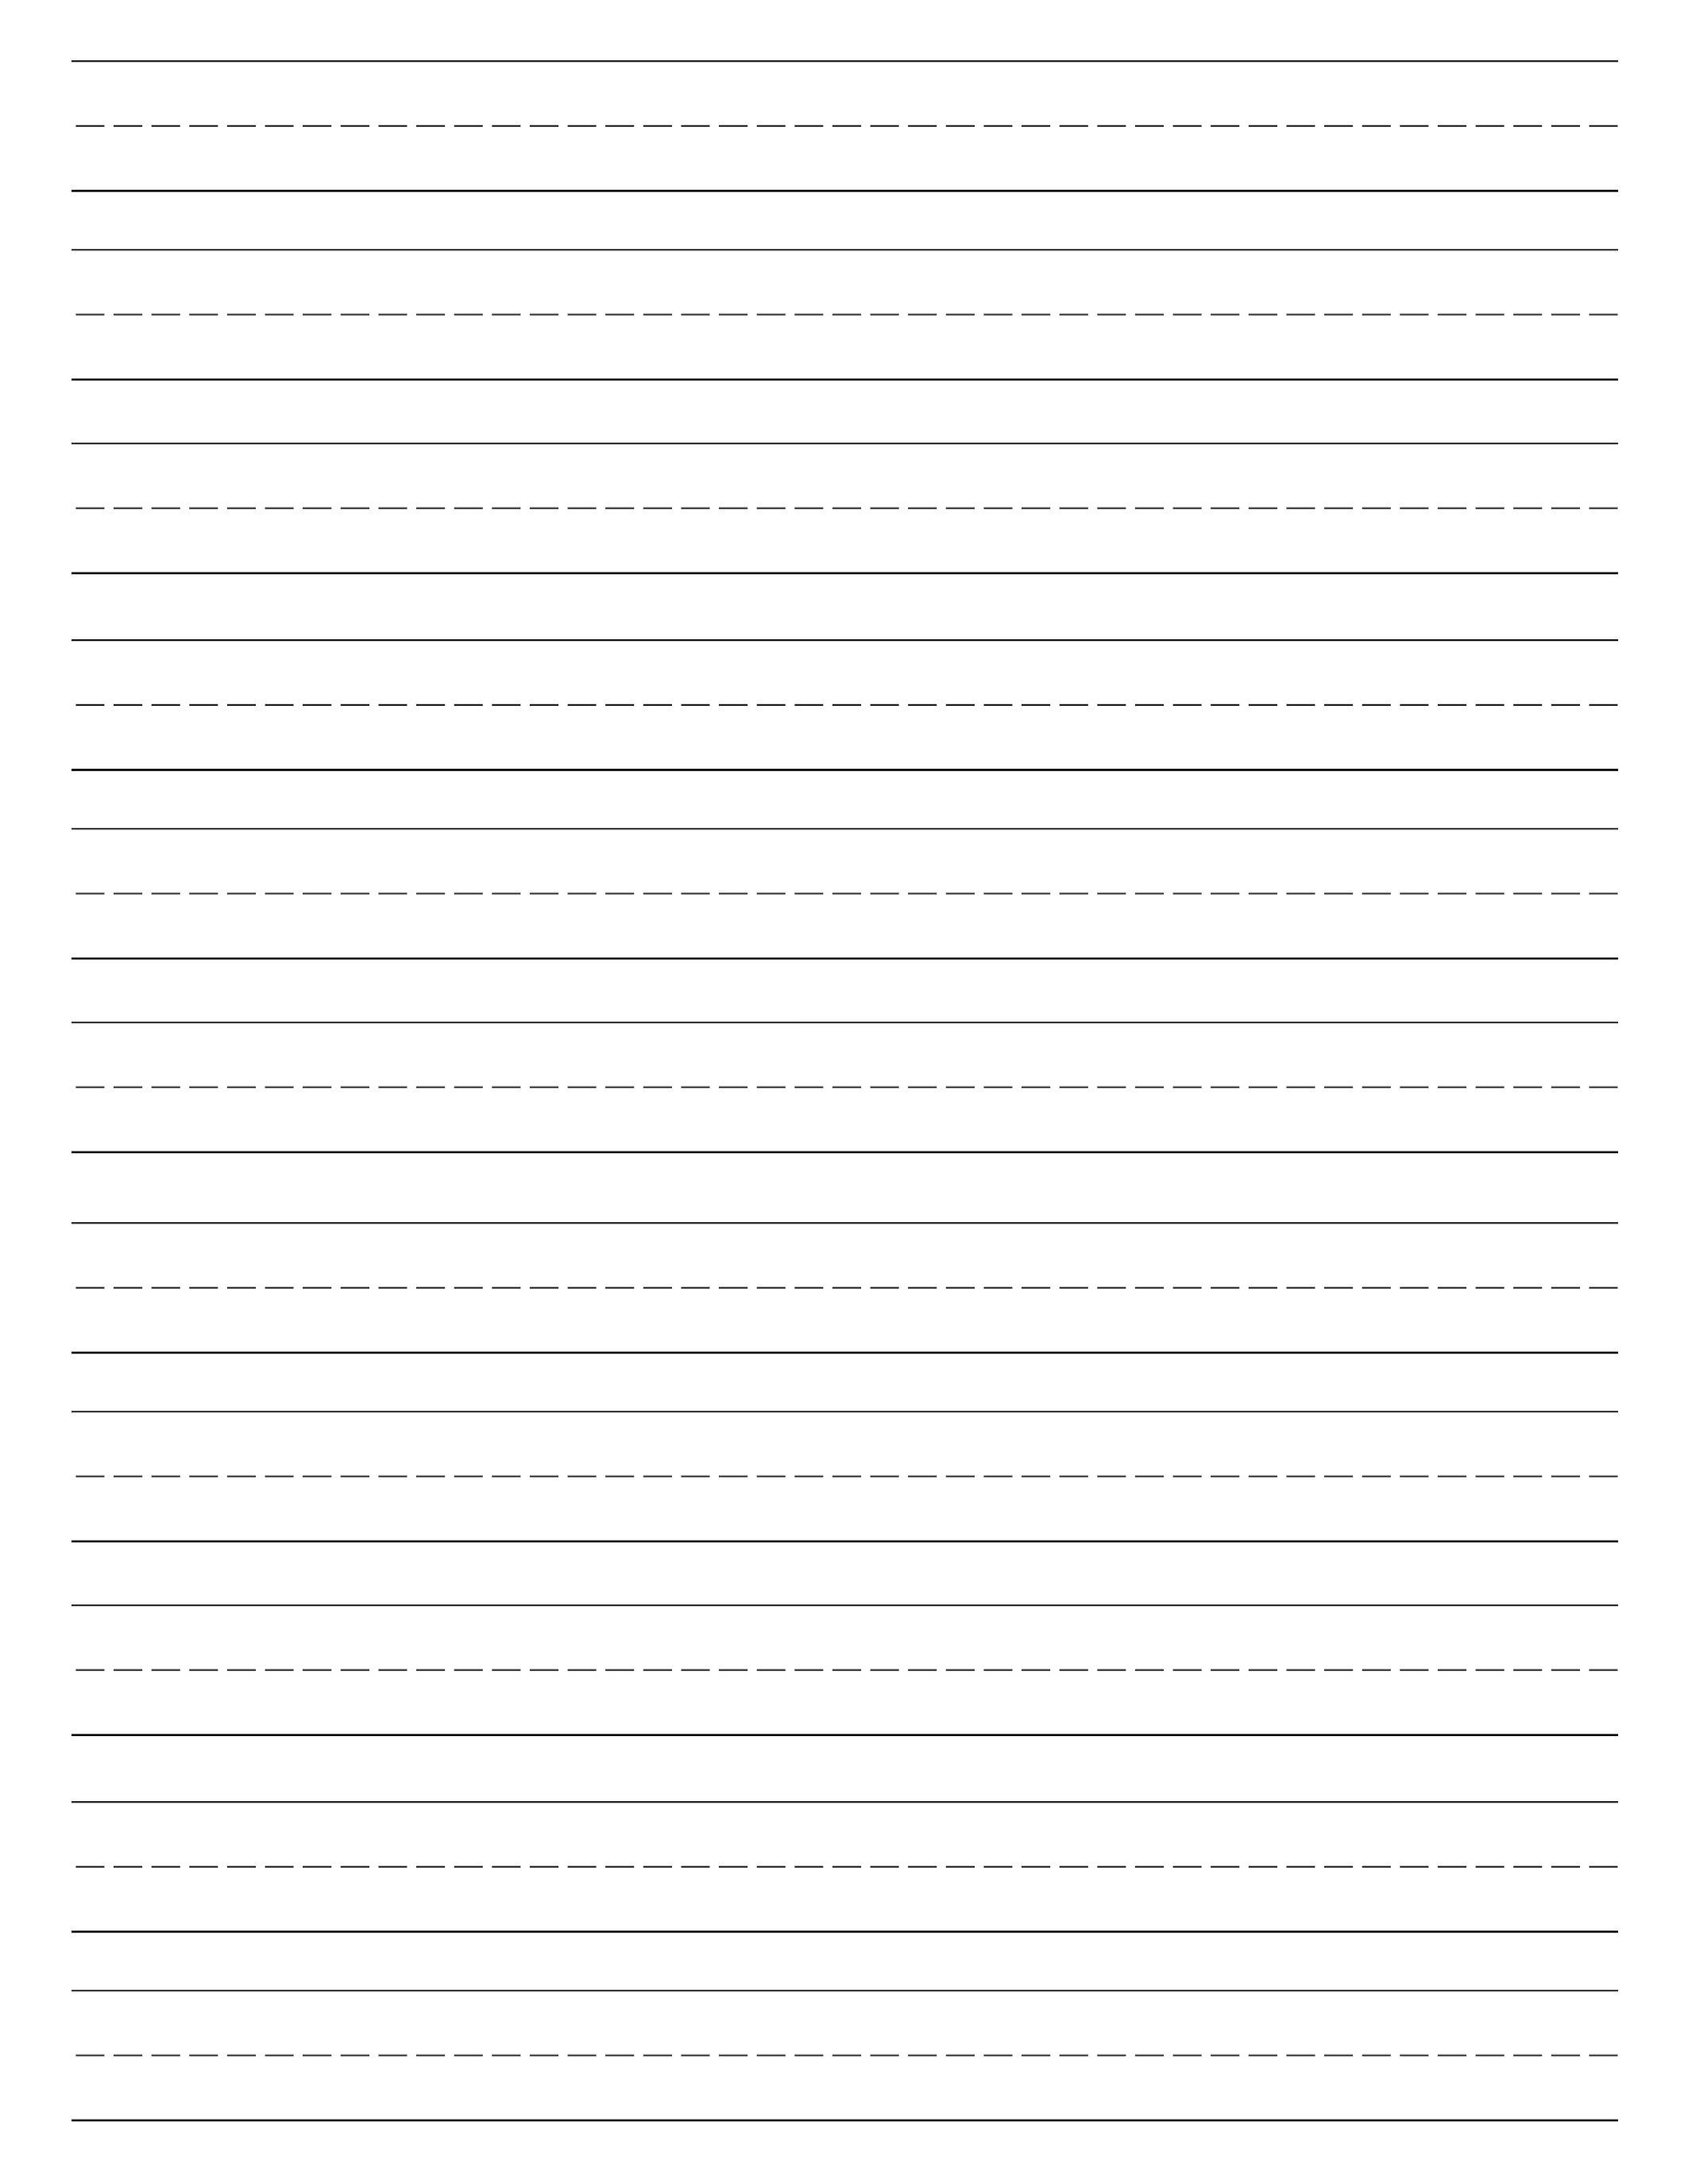 Elementary Lined Paper Printable Free | Free Printable